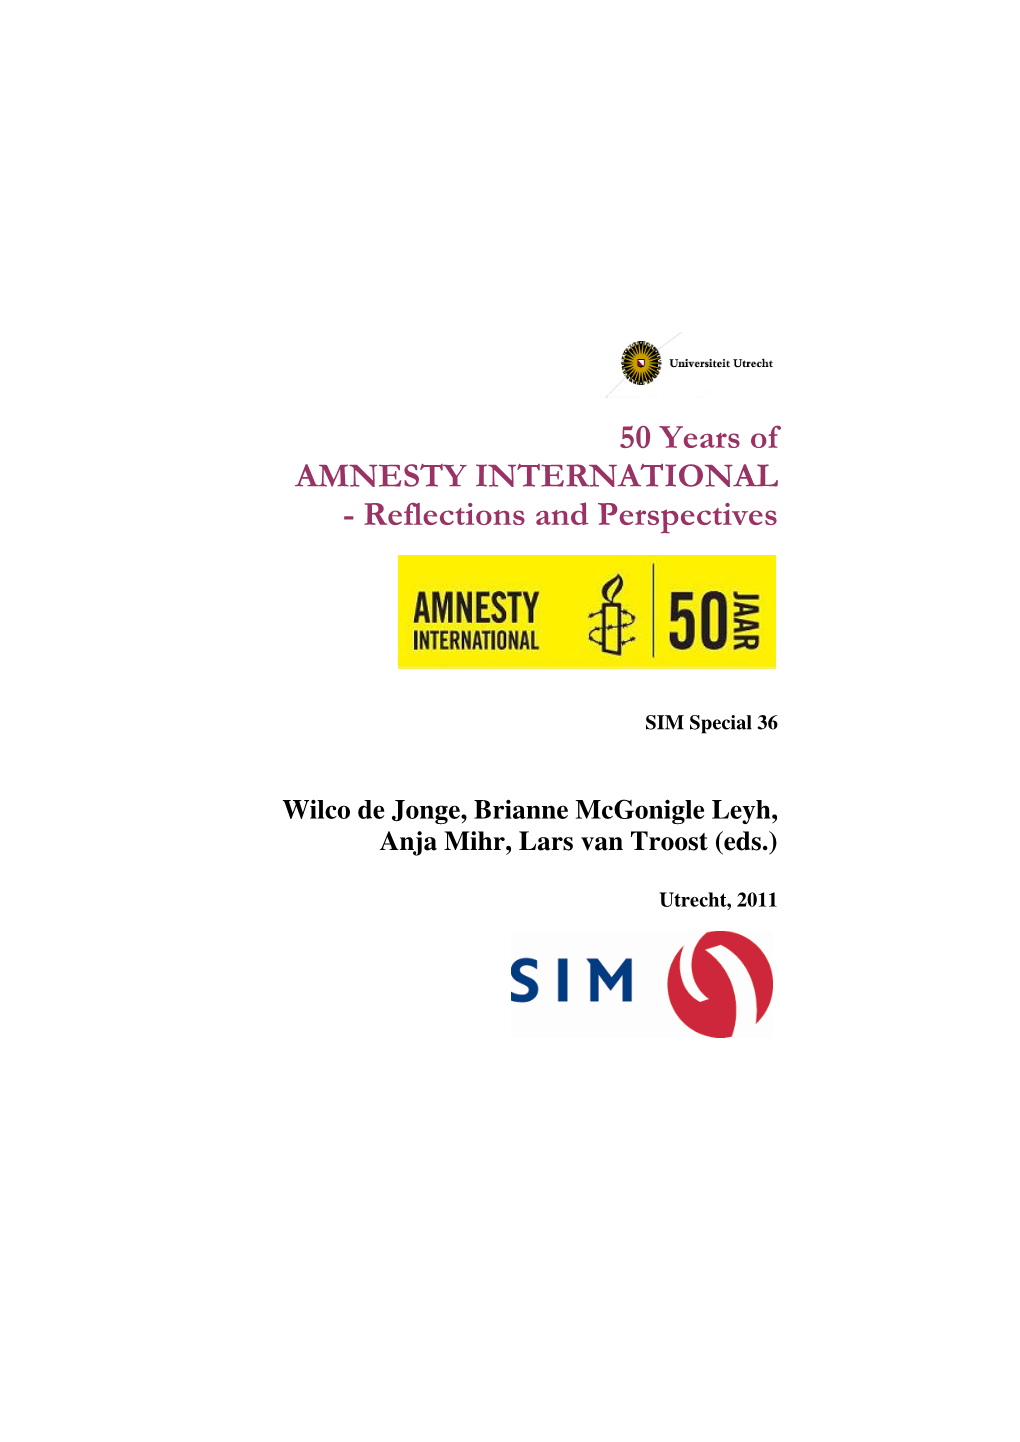 50 Years of AMNESTY INTERNATIONAL - Reflections and Perspectives